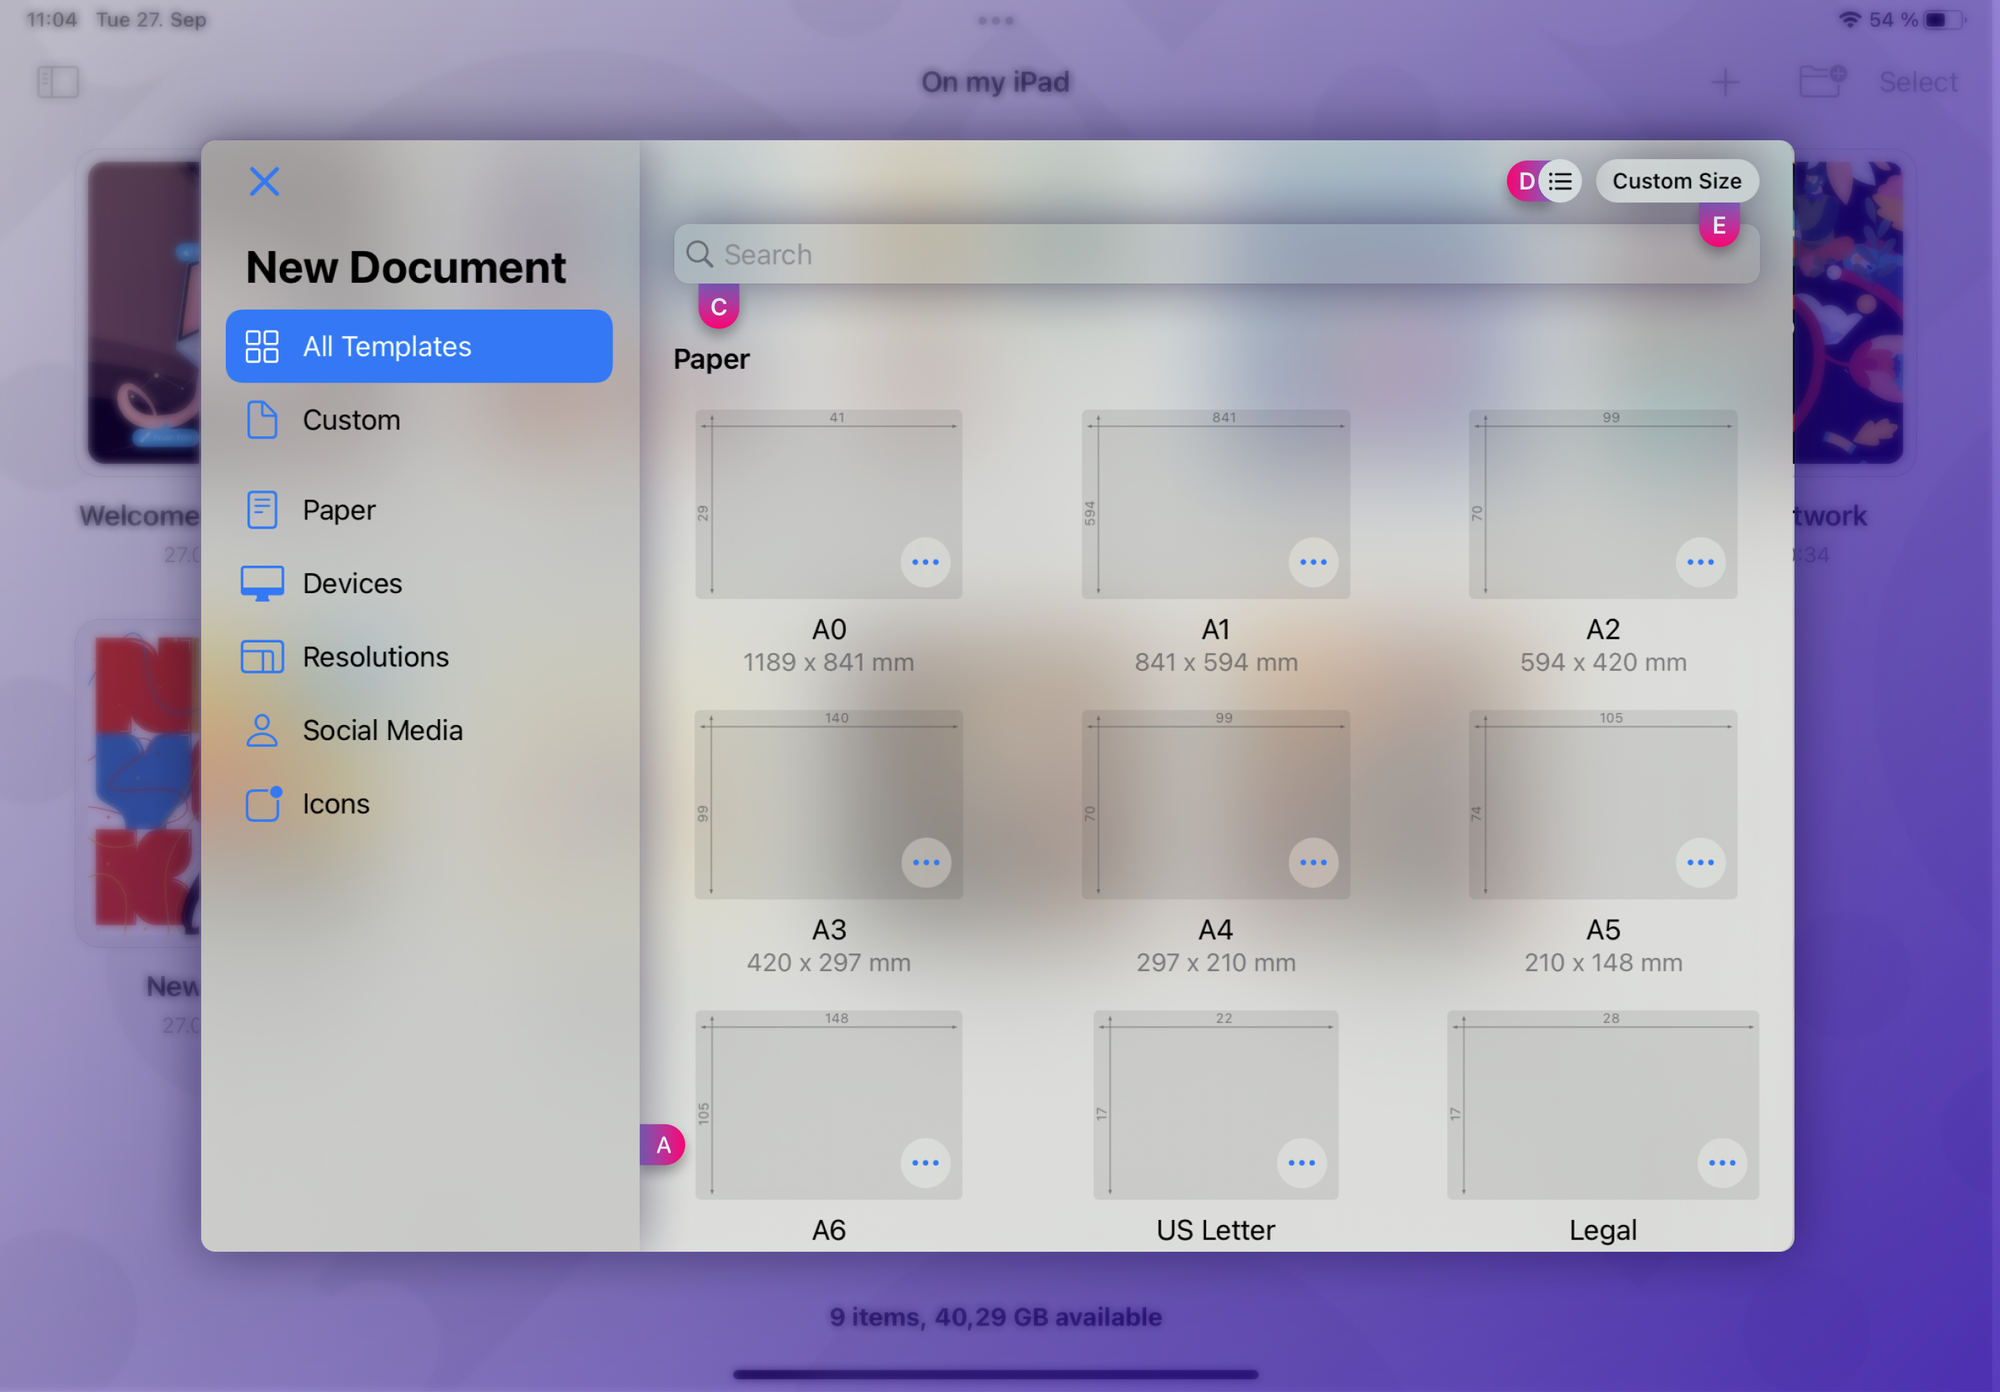 iPad screen showing a document creation interface with various paper size options.